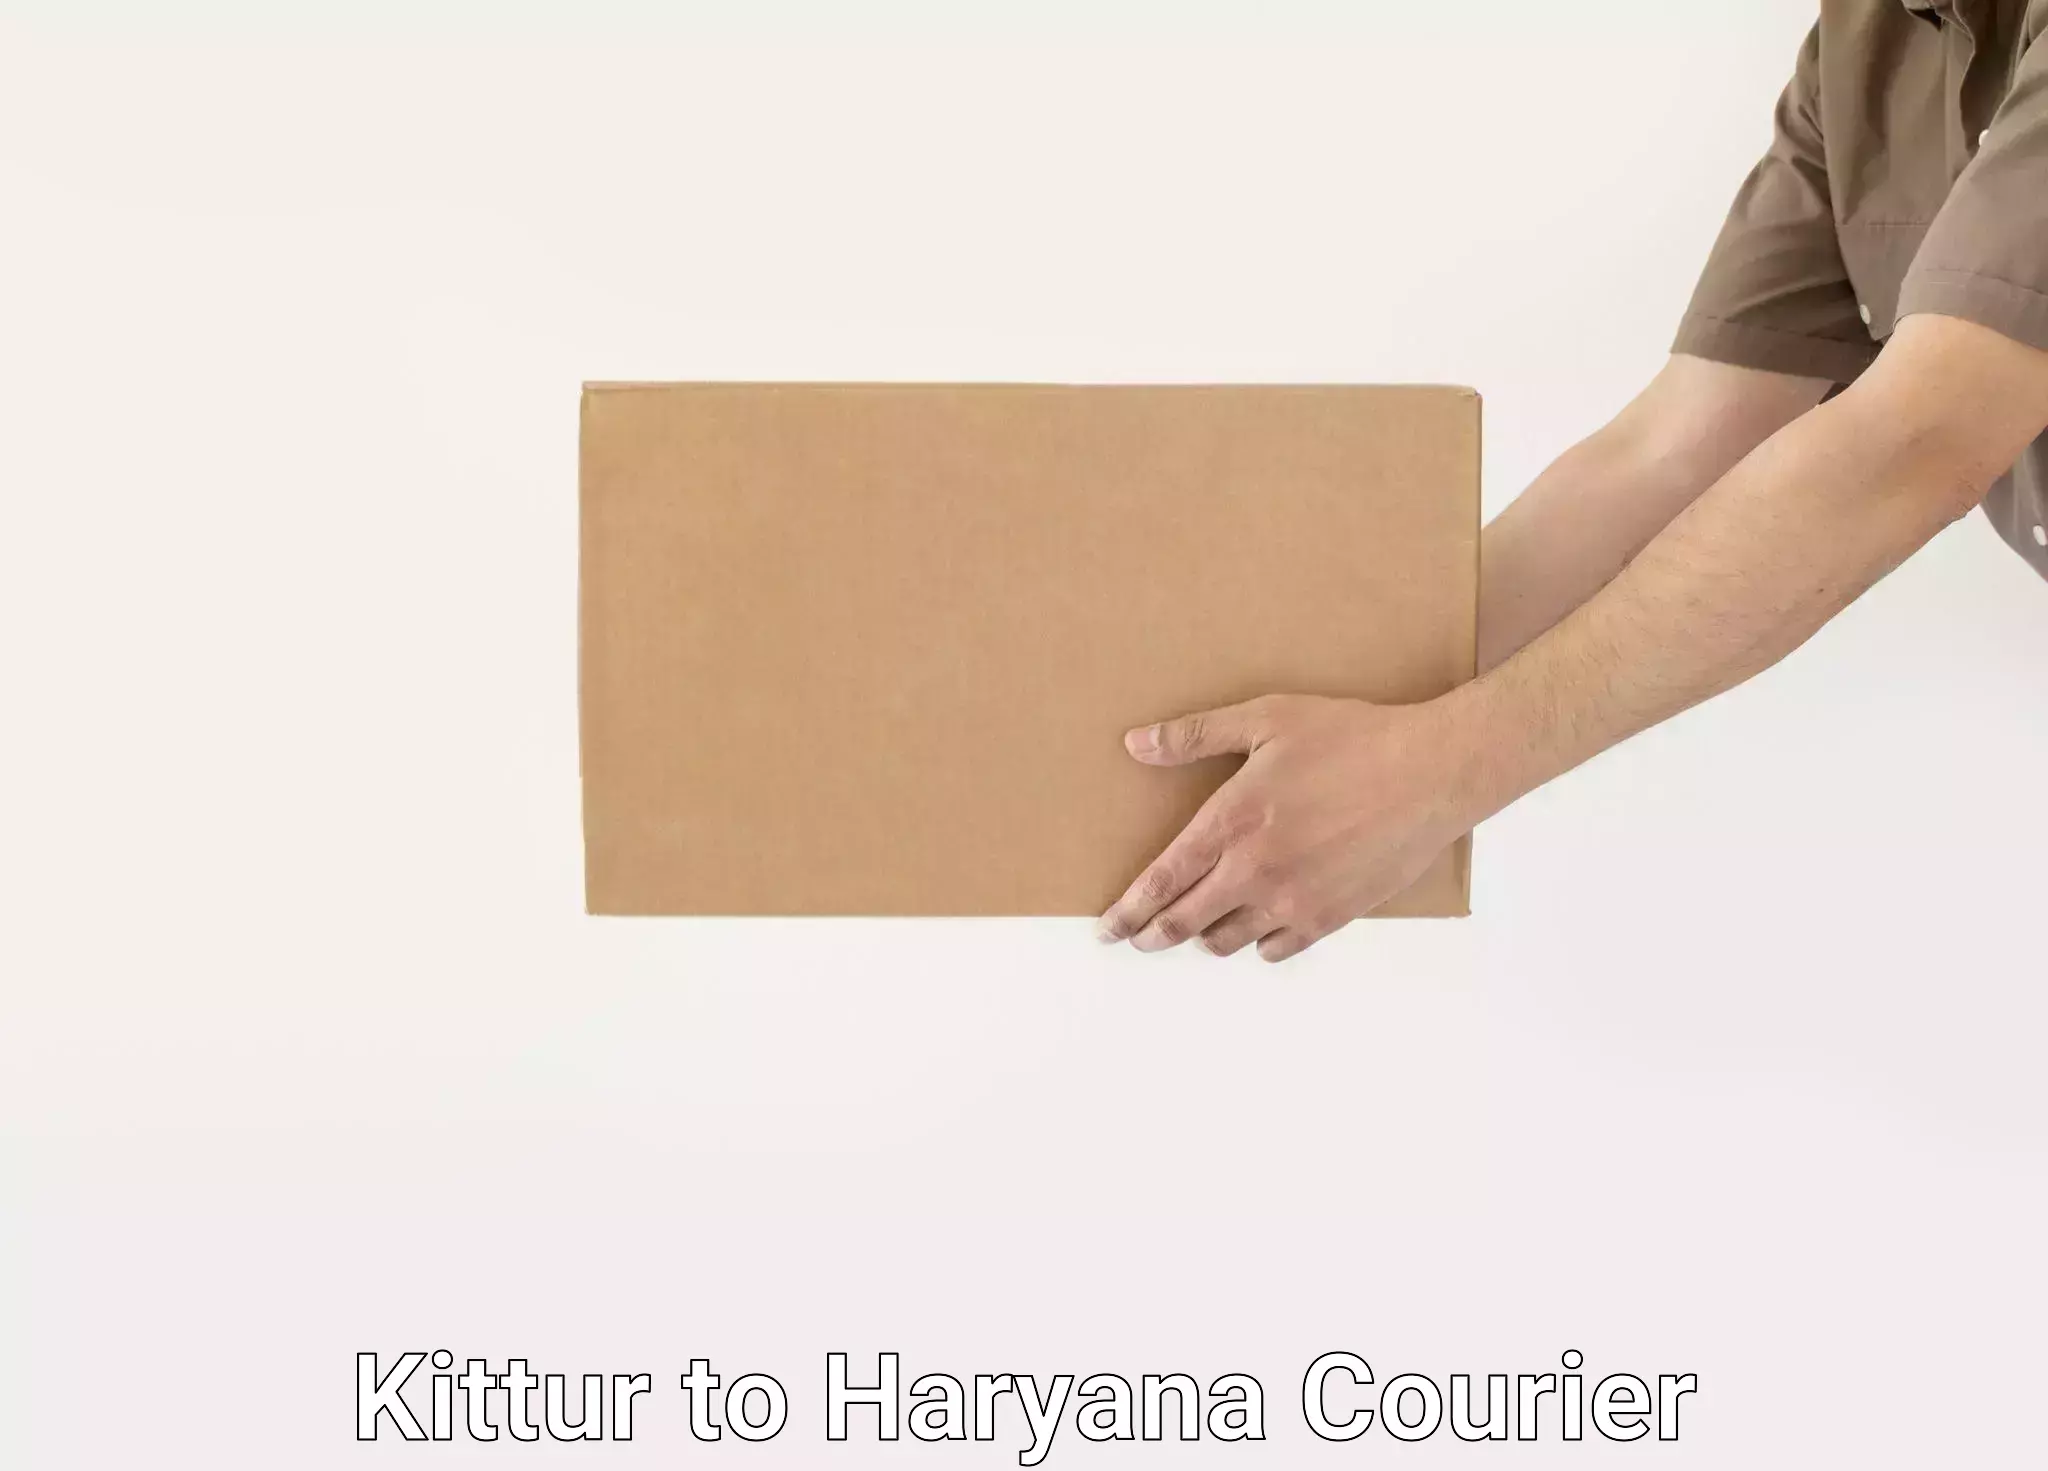 Furniture moving assistance Kittur to Haryana